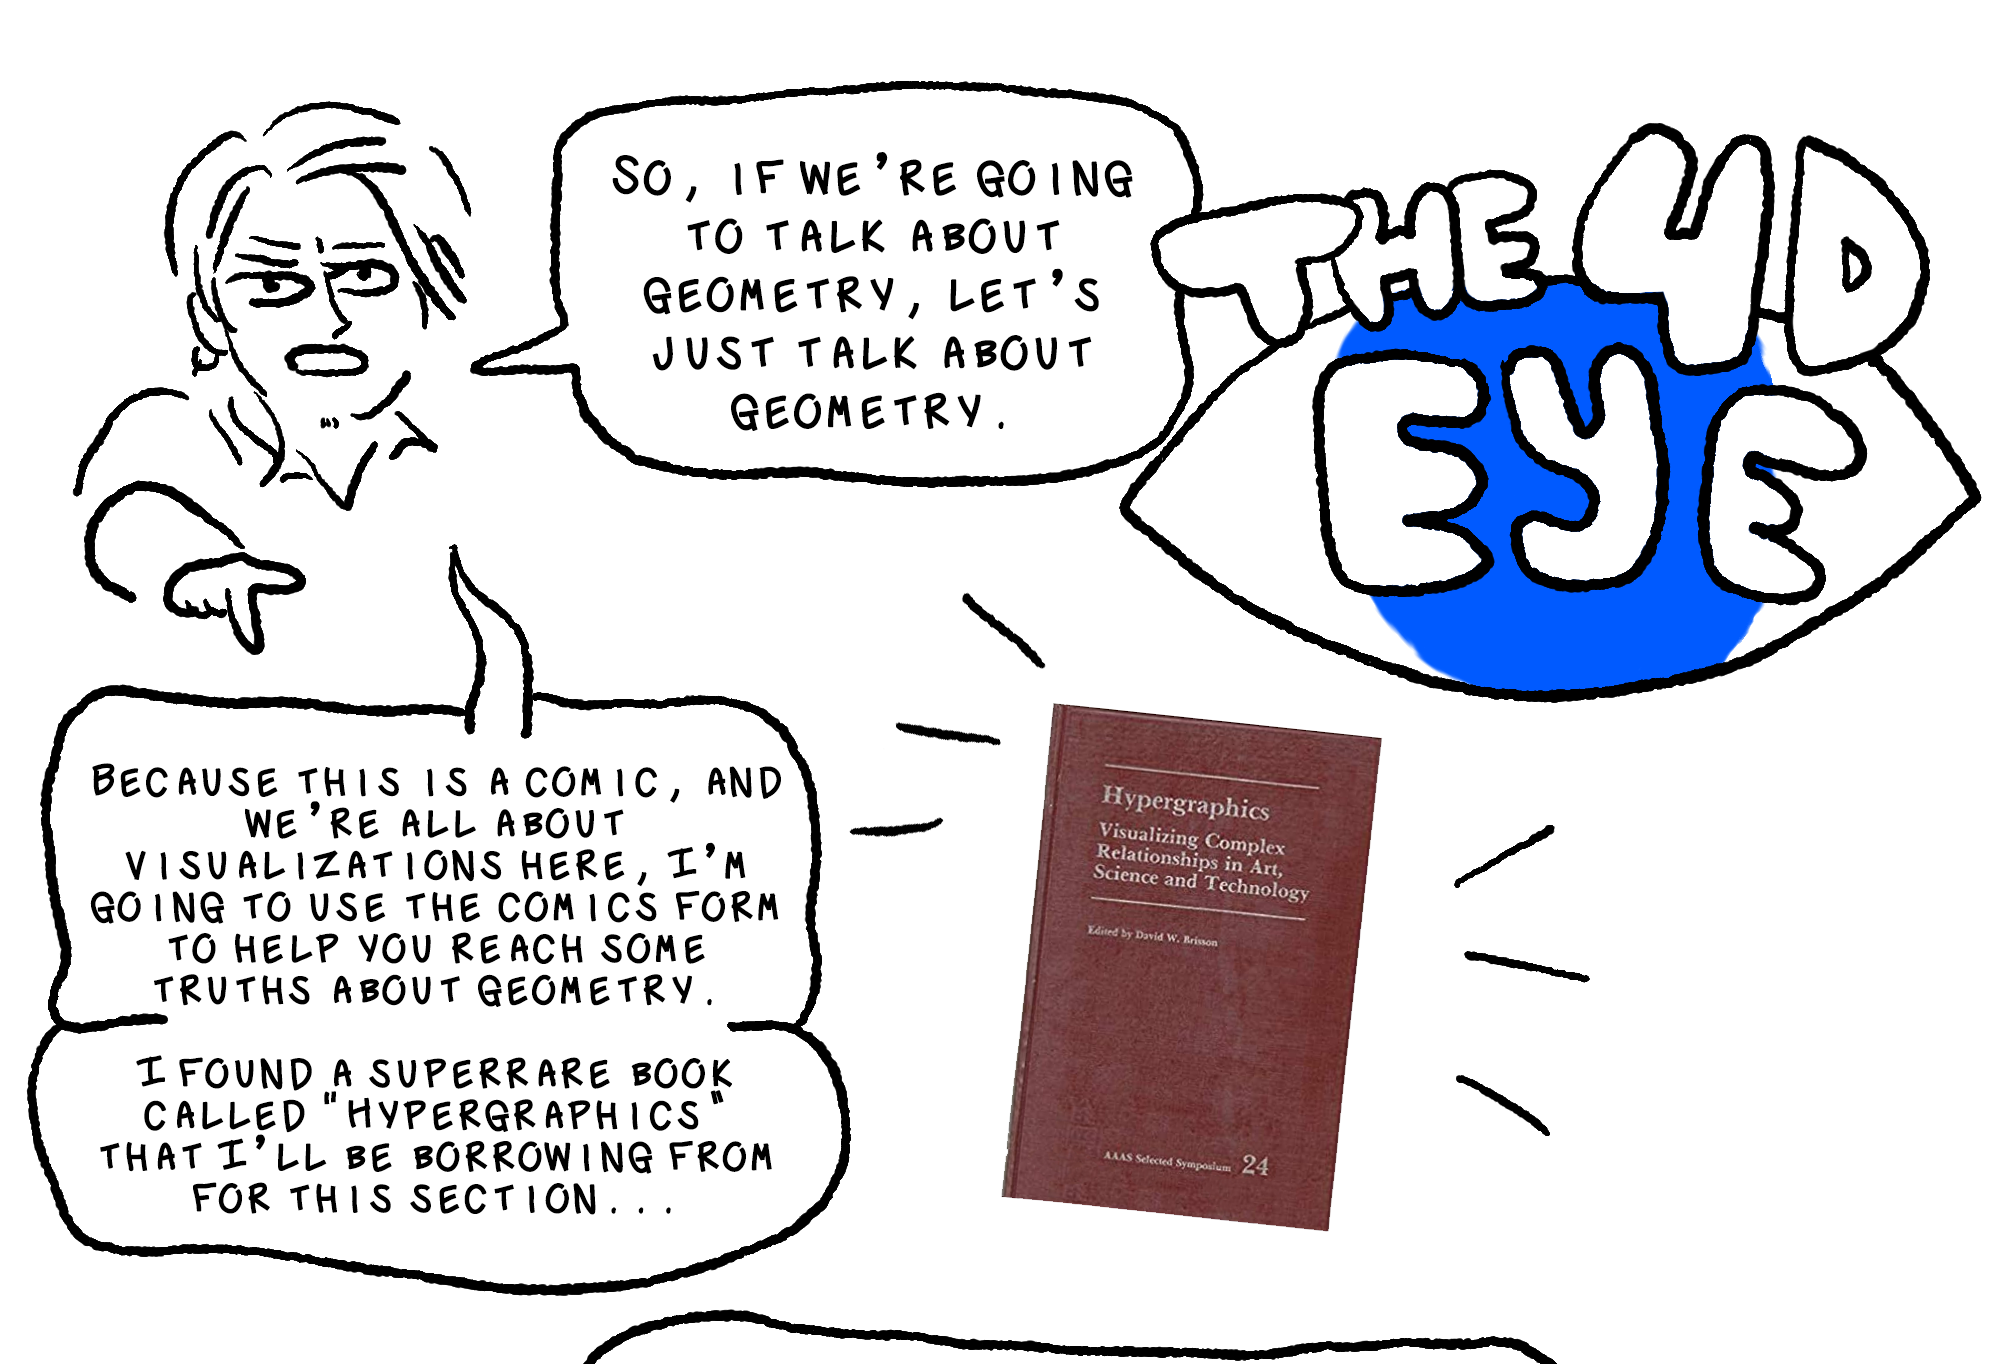 A giant blue eye holds the title for this chapter, the 4D Eye. Elk, looking serious, says, So, if we're going to talk about geometry, let's just talk about geometry. Because this is a comic, and we're all about visualizations here, I'm going to use the omics form to help you reach some truths about geometry. I found a super-rare book called Hypergraphics that I'll be borrowing from for this section... the book Hypergraphics is floating next to this speech bubble, and if you click on it, the link leads to the volume on google books.